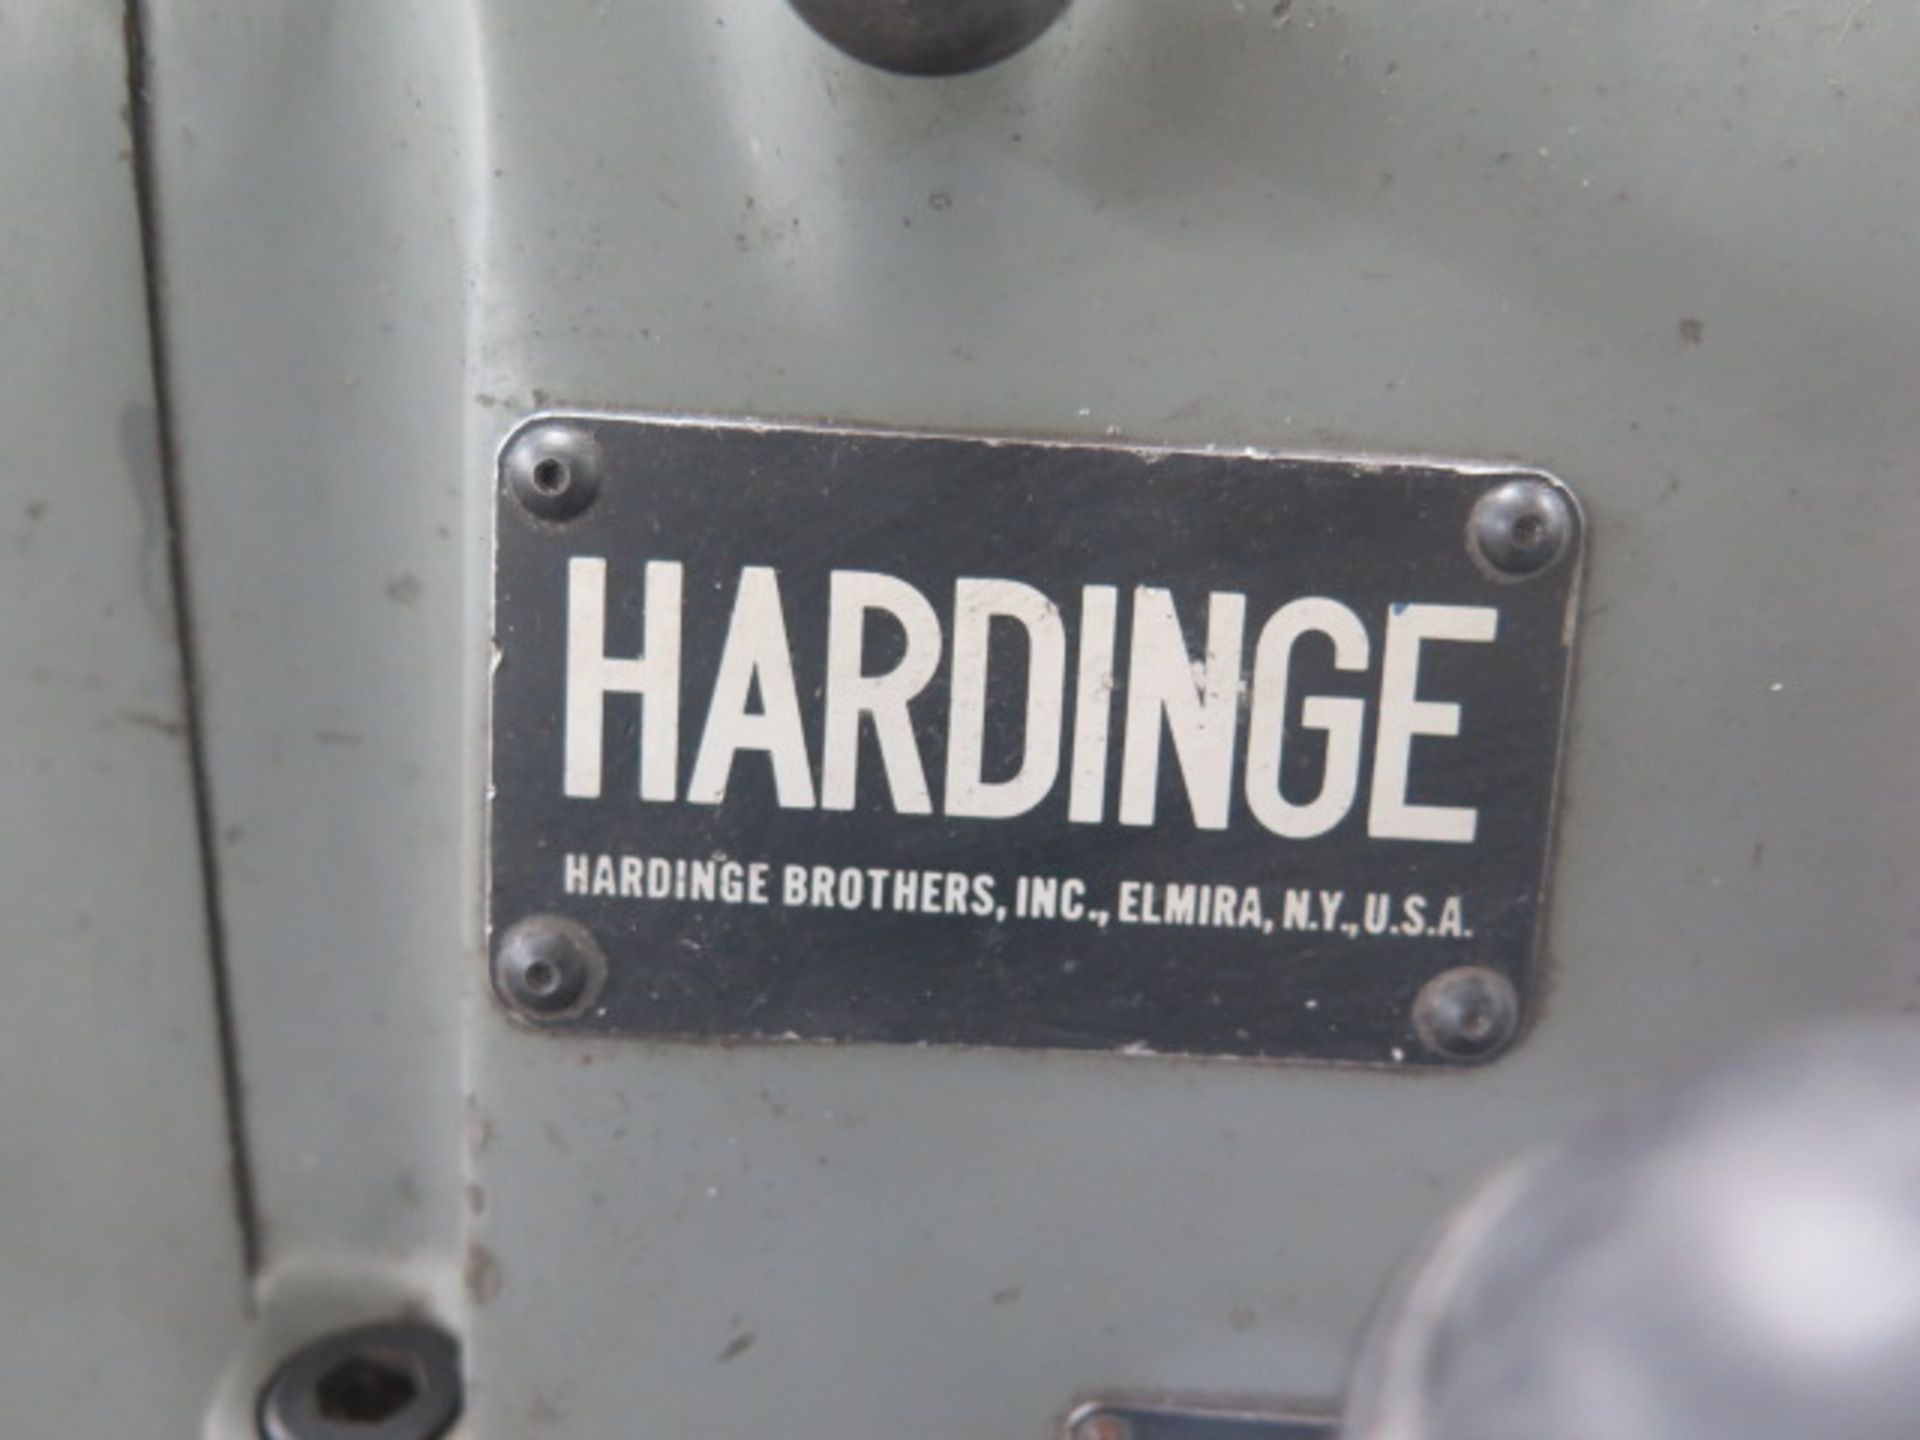 Hardinge TFB-H Wide Bed Second OP Lathe w/ 125-3000 RPM, Tailstock, Power Feeds, KDK, SOLD AS IS - Image 12 of 13